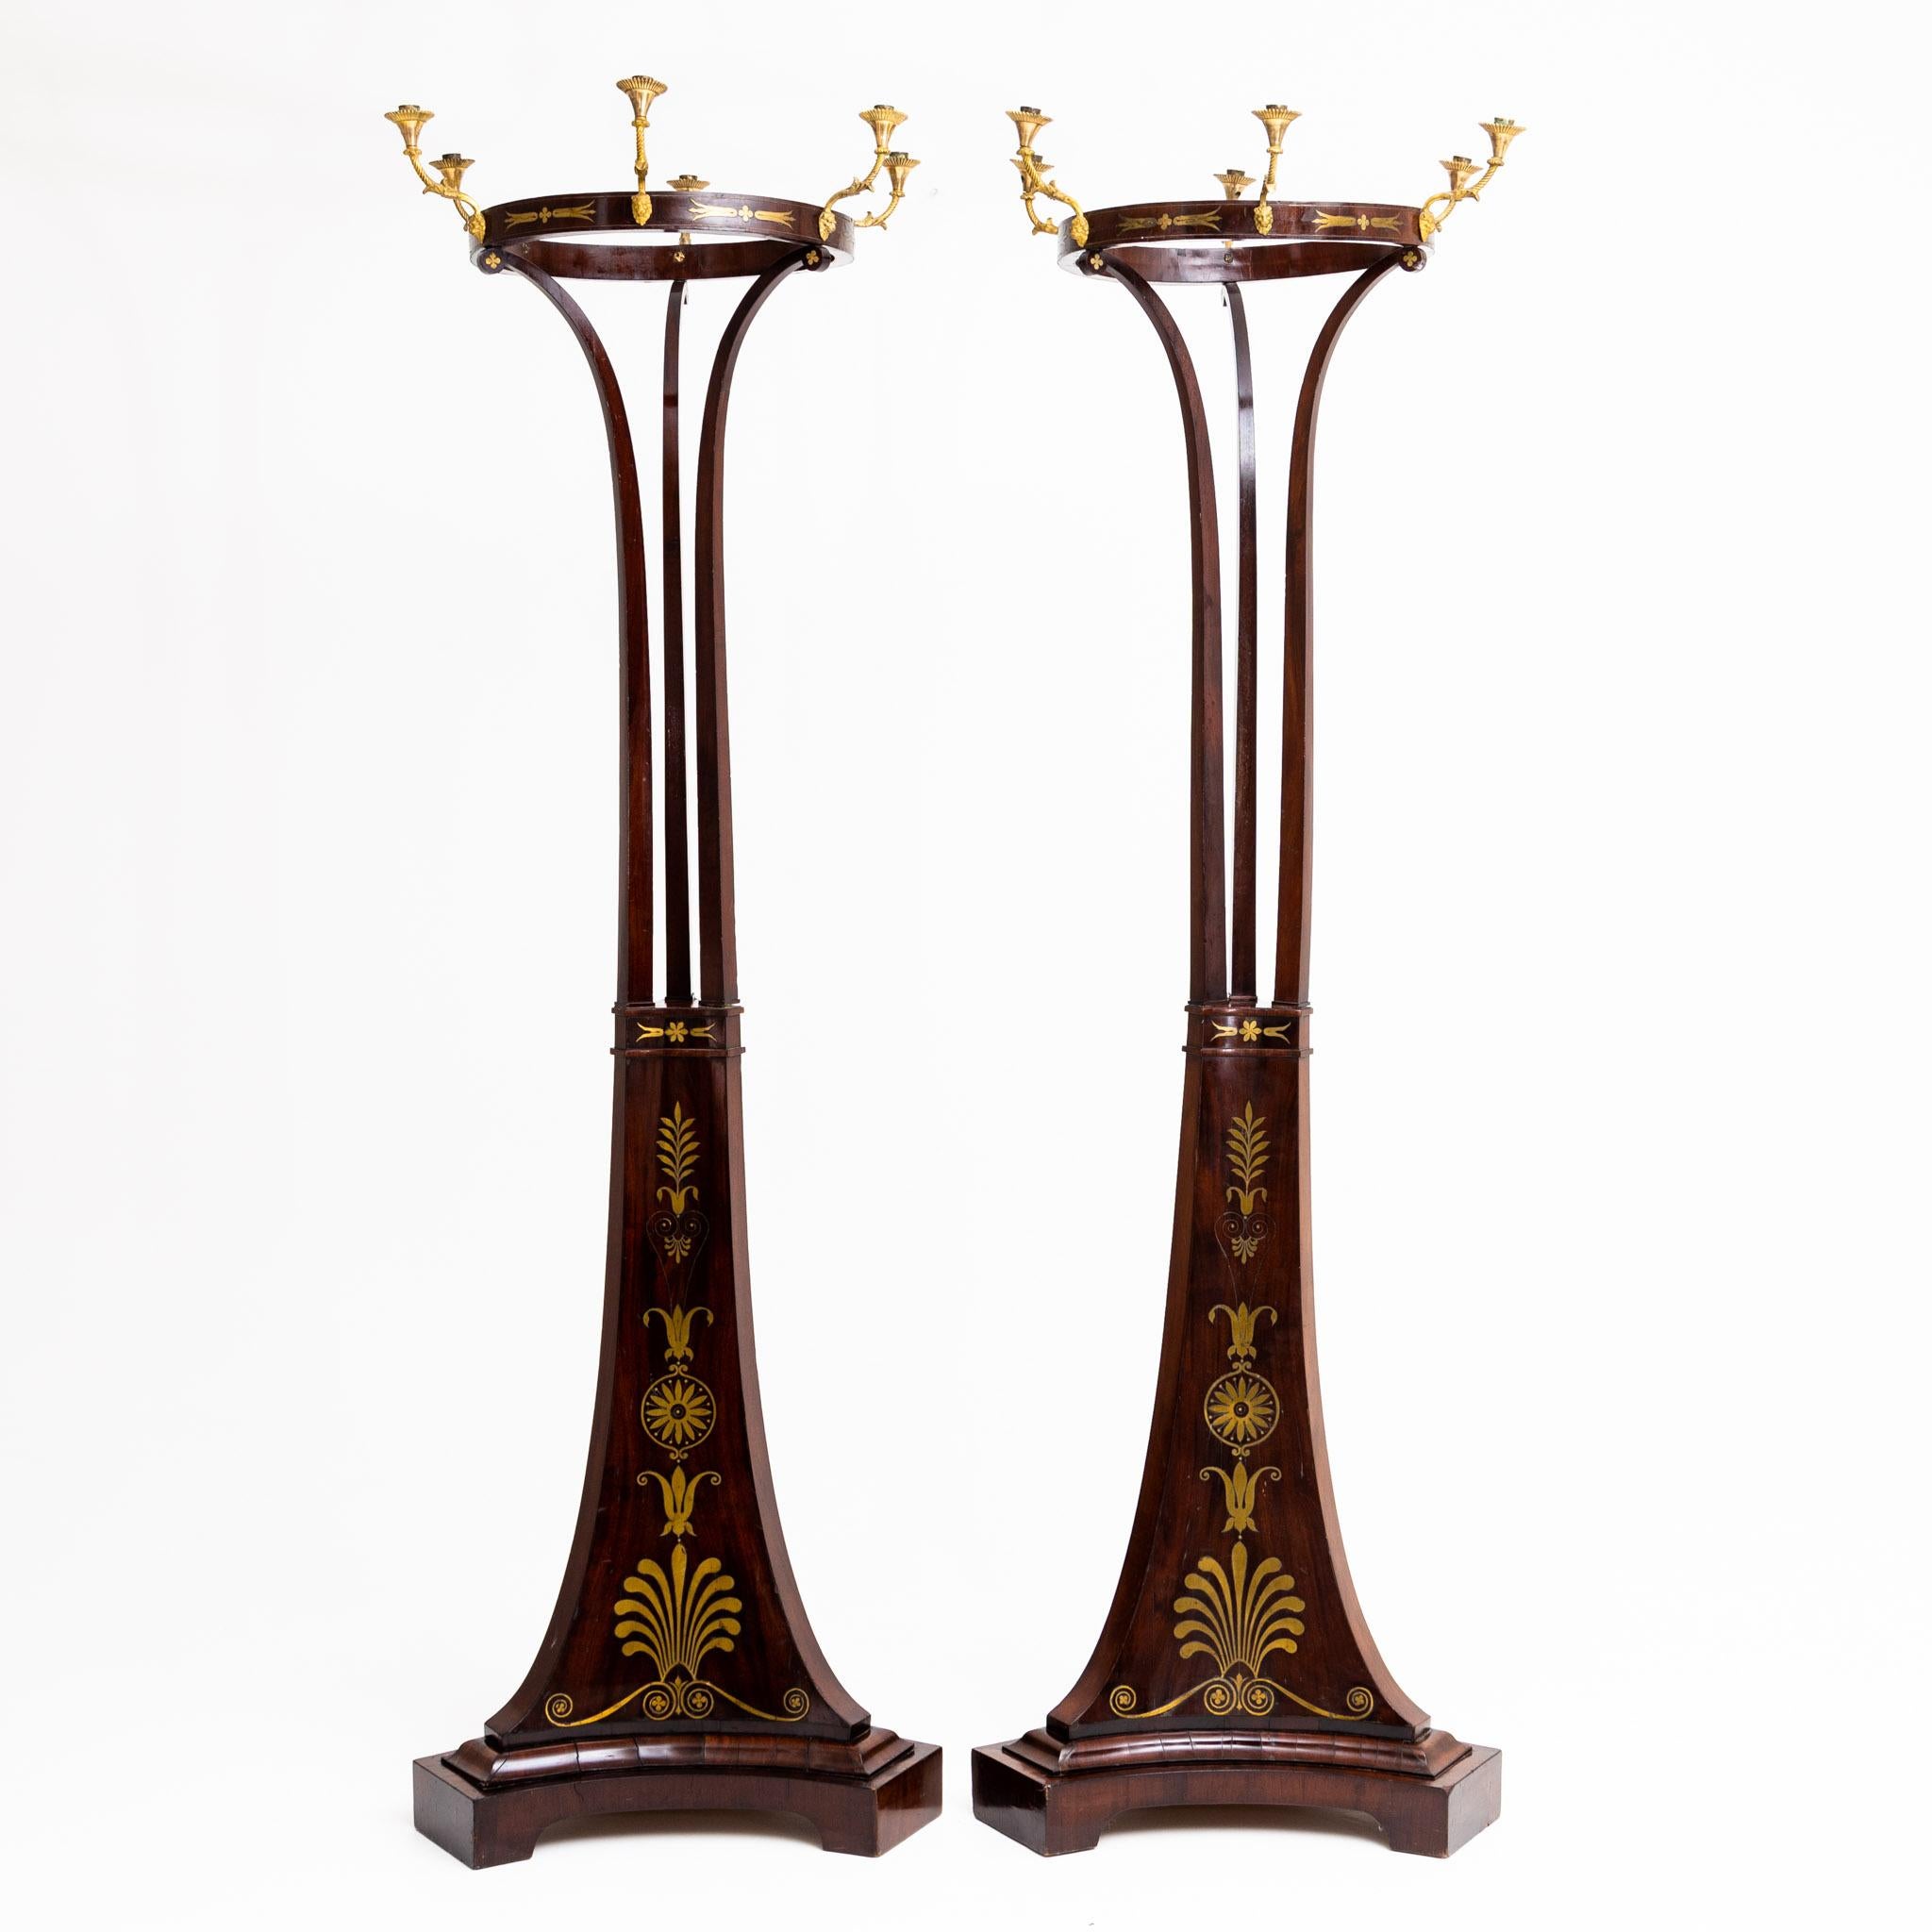 Pair of large Empire torches or candelabra on a three-pass base tapering to the top and inlaid with brass inlays in the form of acanthus leaves and floral motifs. Rising above three slender struts is the slender hoop with six fire-gilded grommets